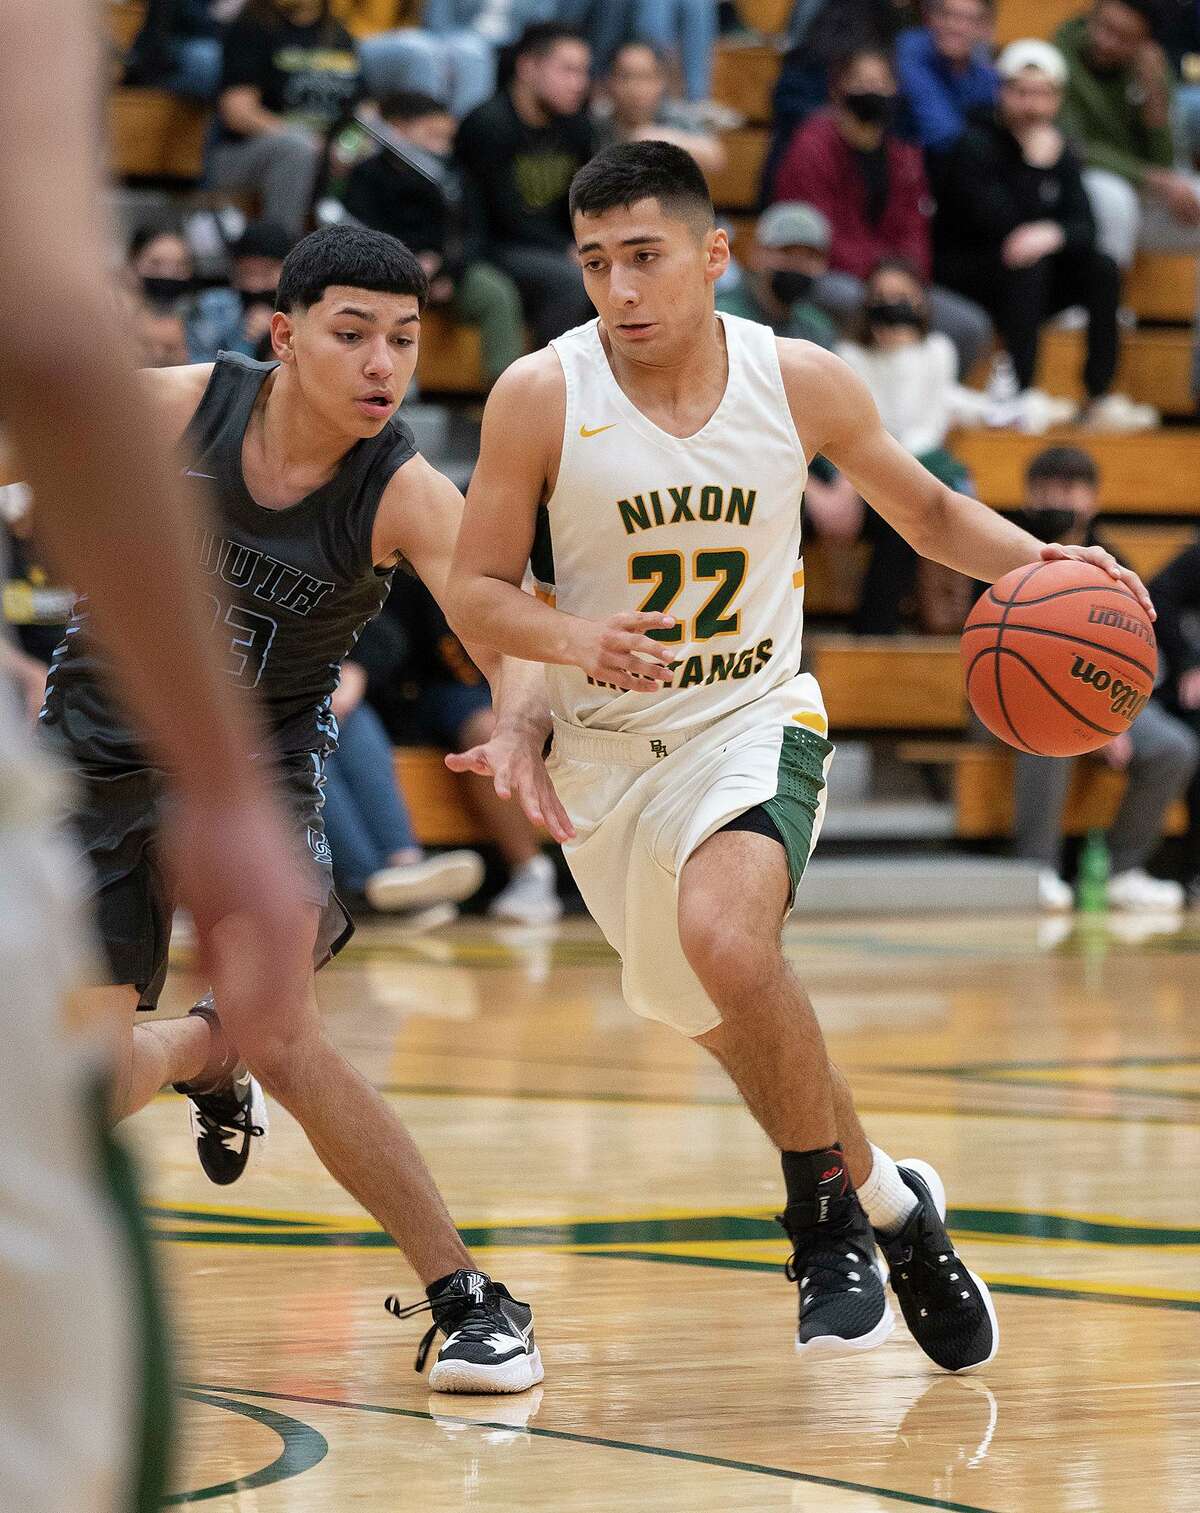 Nixon High School’s Adrien Medellin moves the ball down the court during a game against United South High School, Friday, Jan. 21, 2022 at Nixon High School.